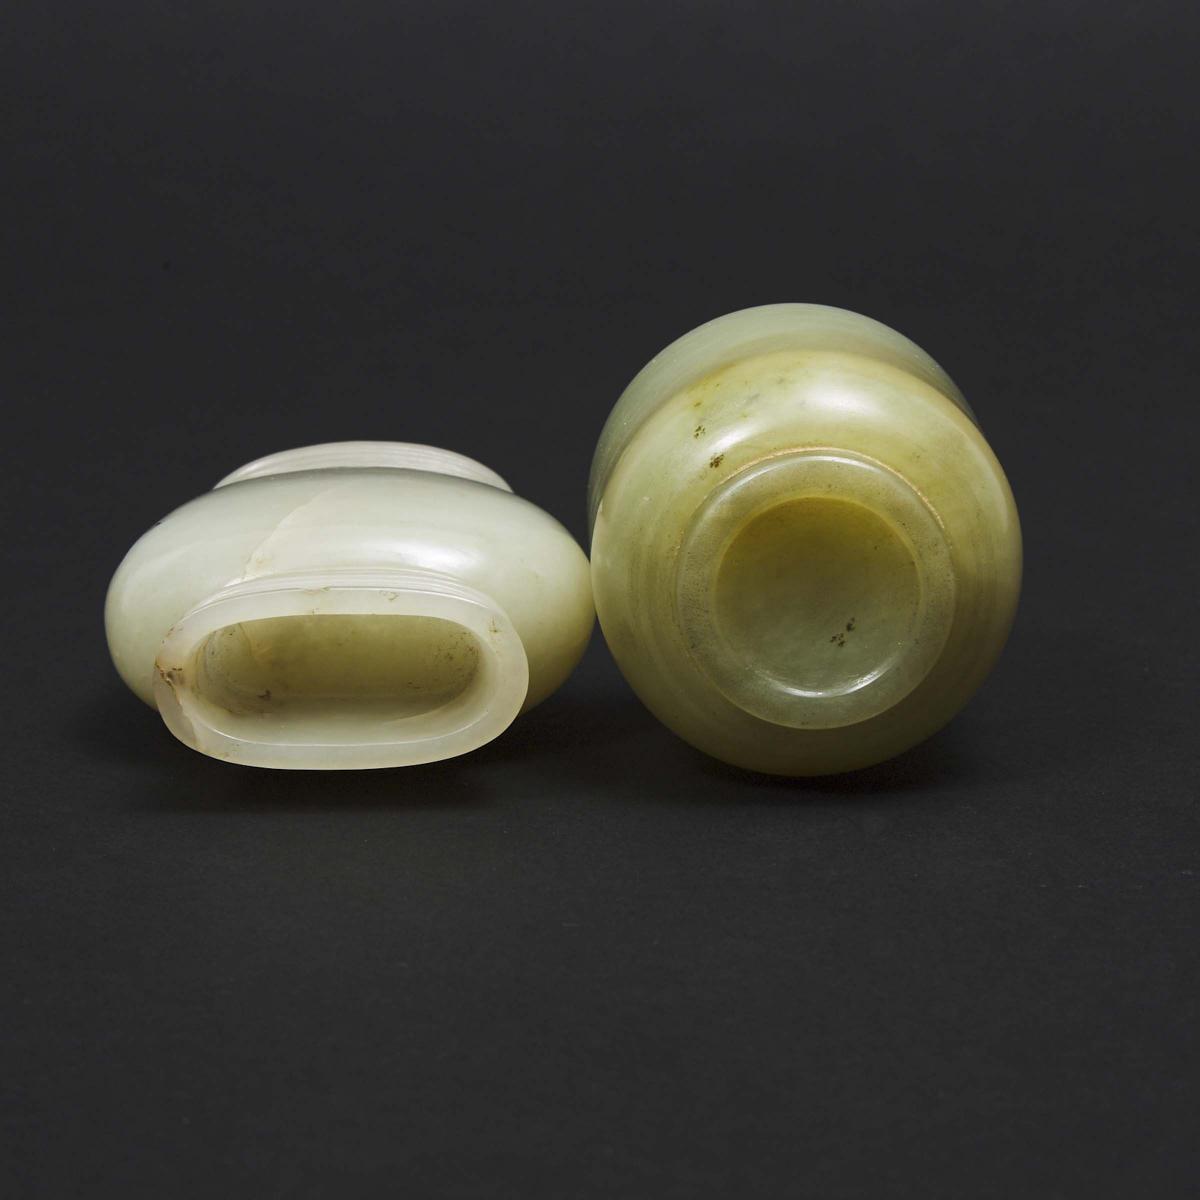 A White Jade Vase, together with a Pale Celadon Jade Cup, 19th/20th Century, 十九/二十世纪 玉瓶玉杯一组两件, vase - Image 3 of 3